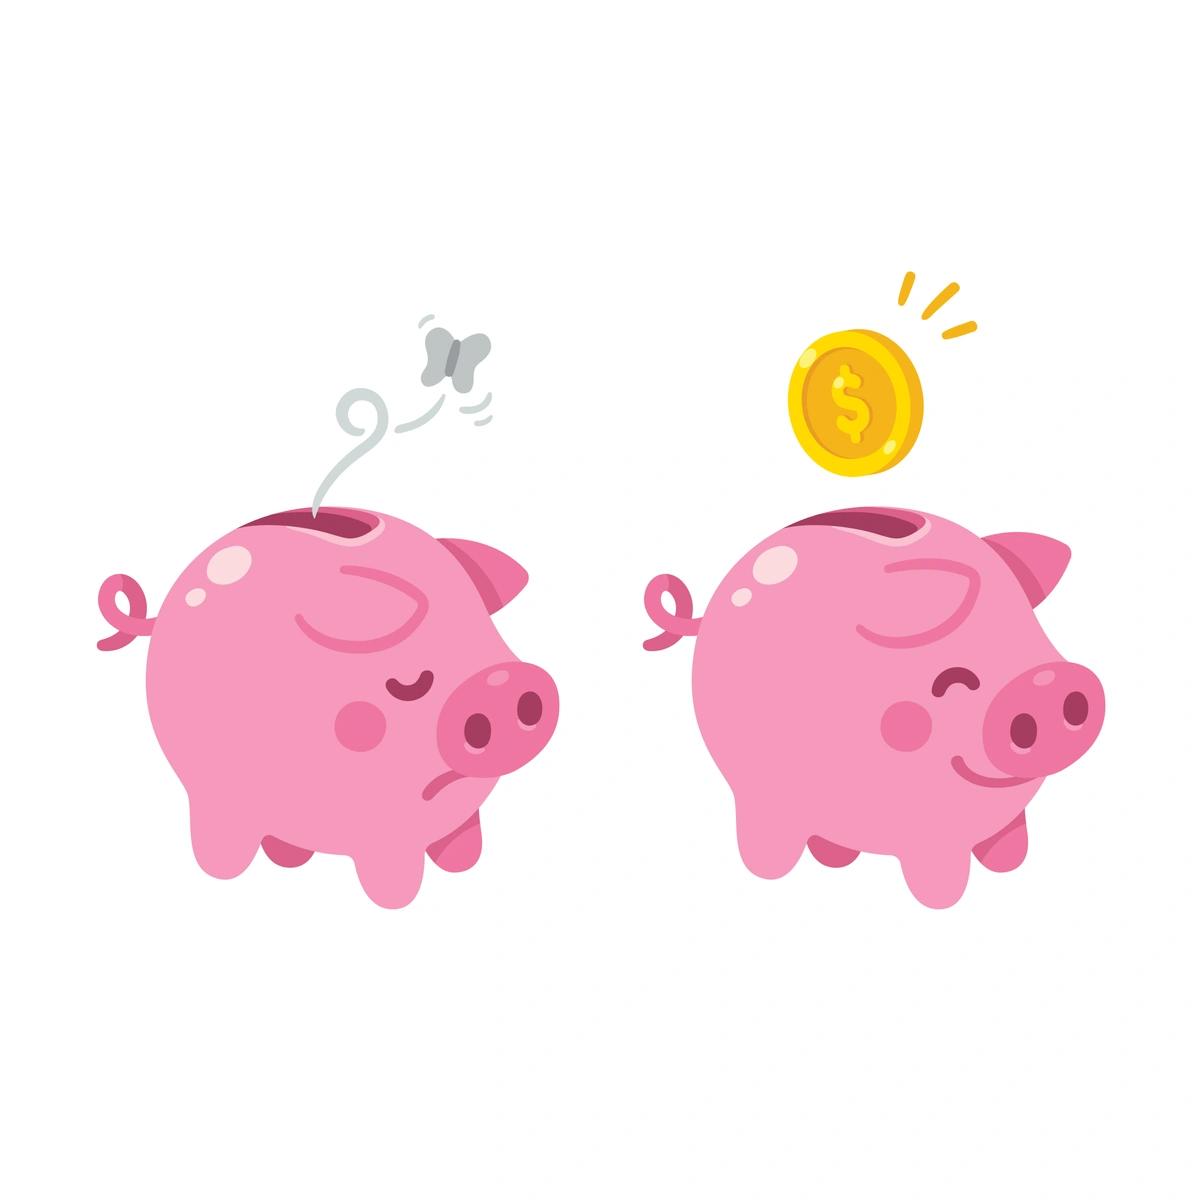 An illustration of a a sad piggy bank that's empty and a happy piggy bank with a coin being dropped into it.